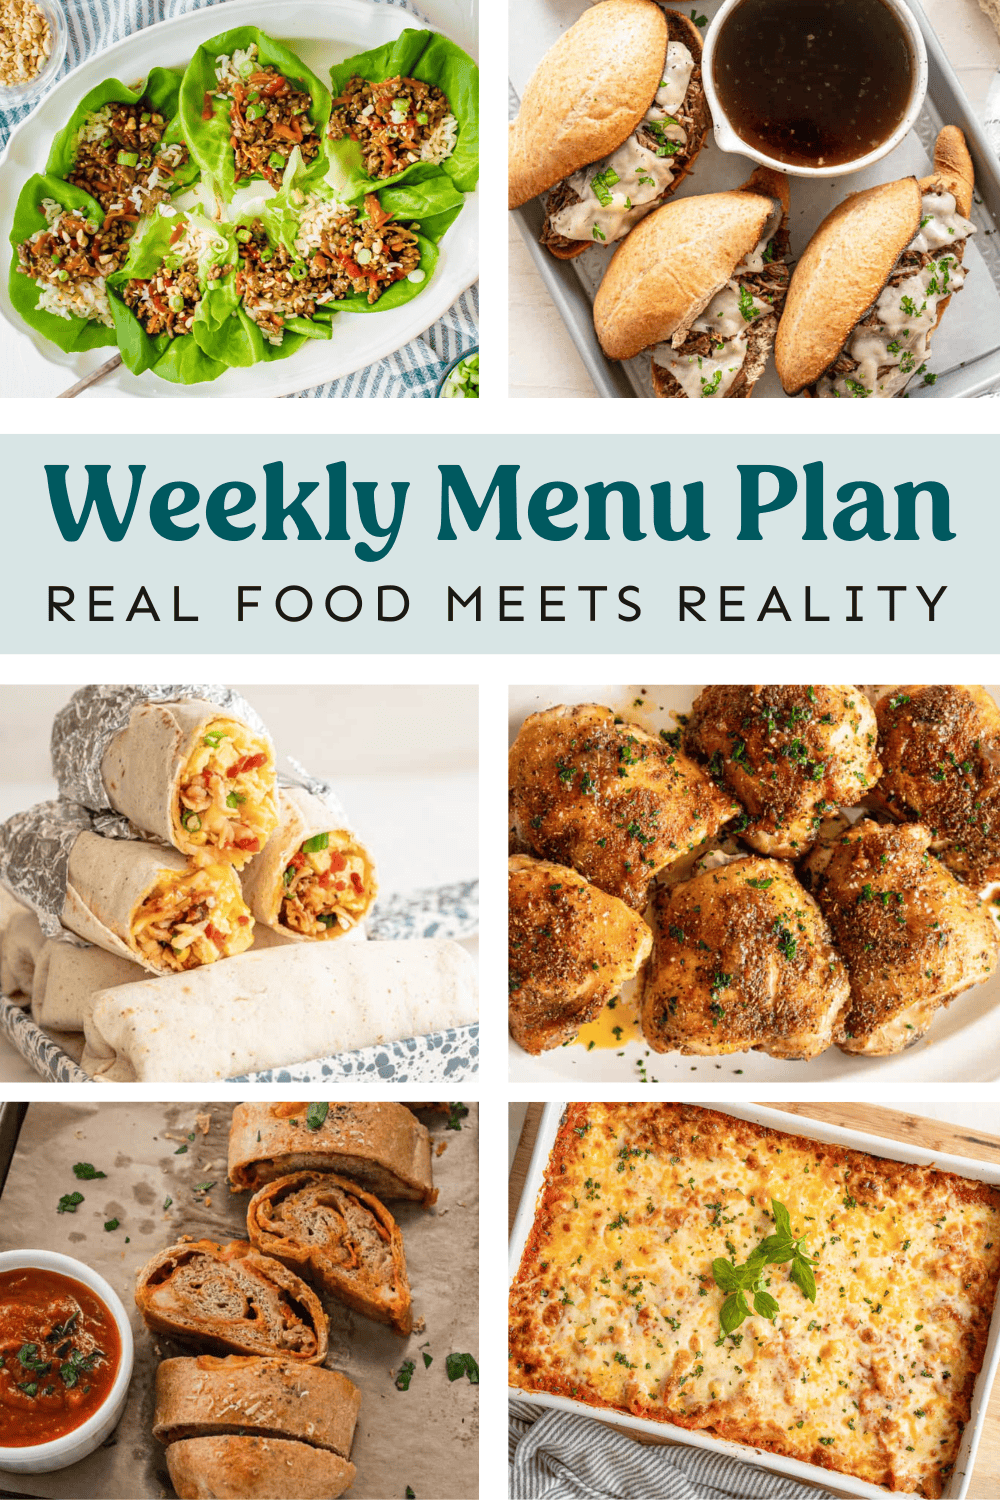 Collage of meals on the meal plan.